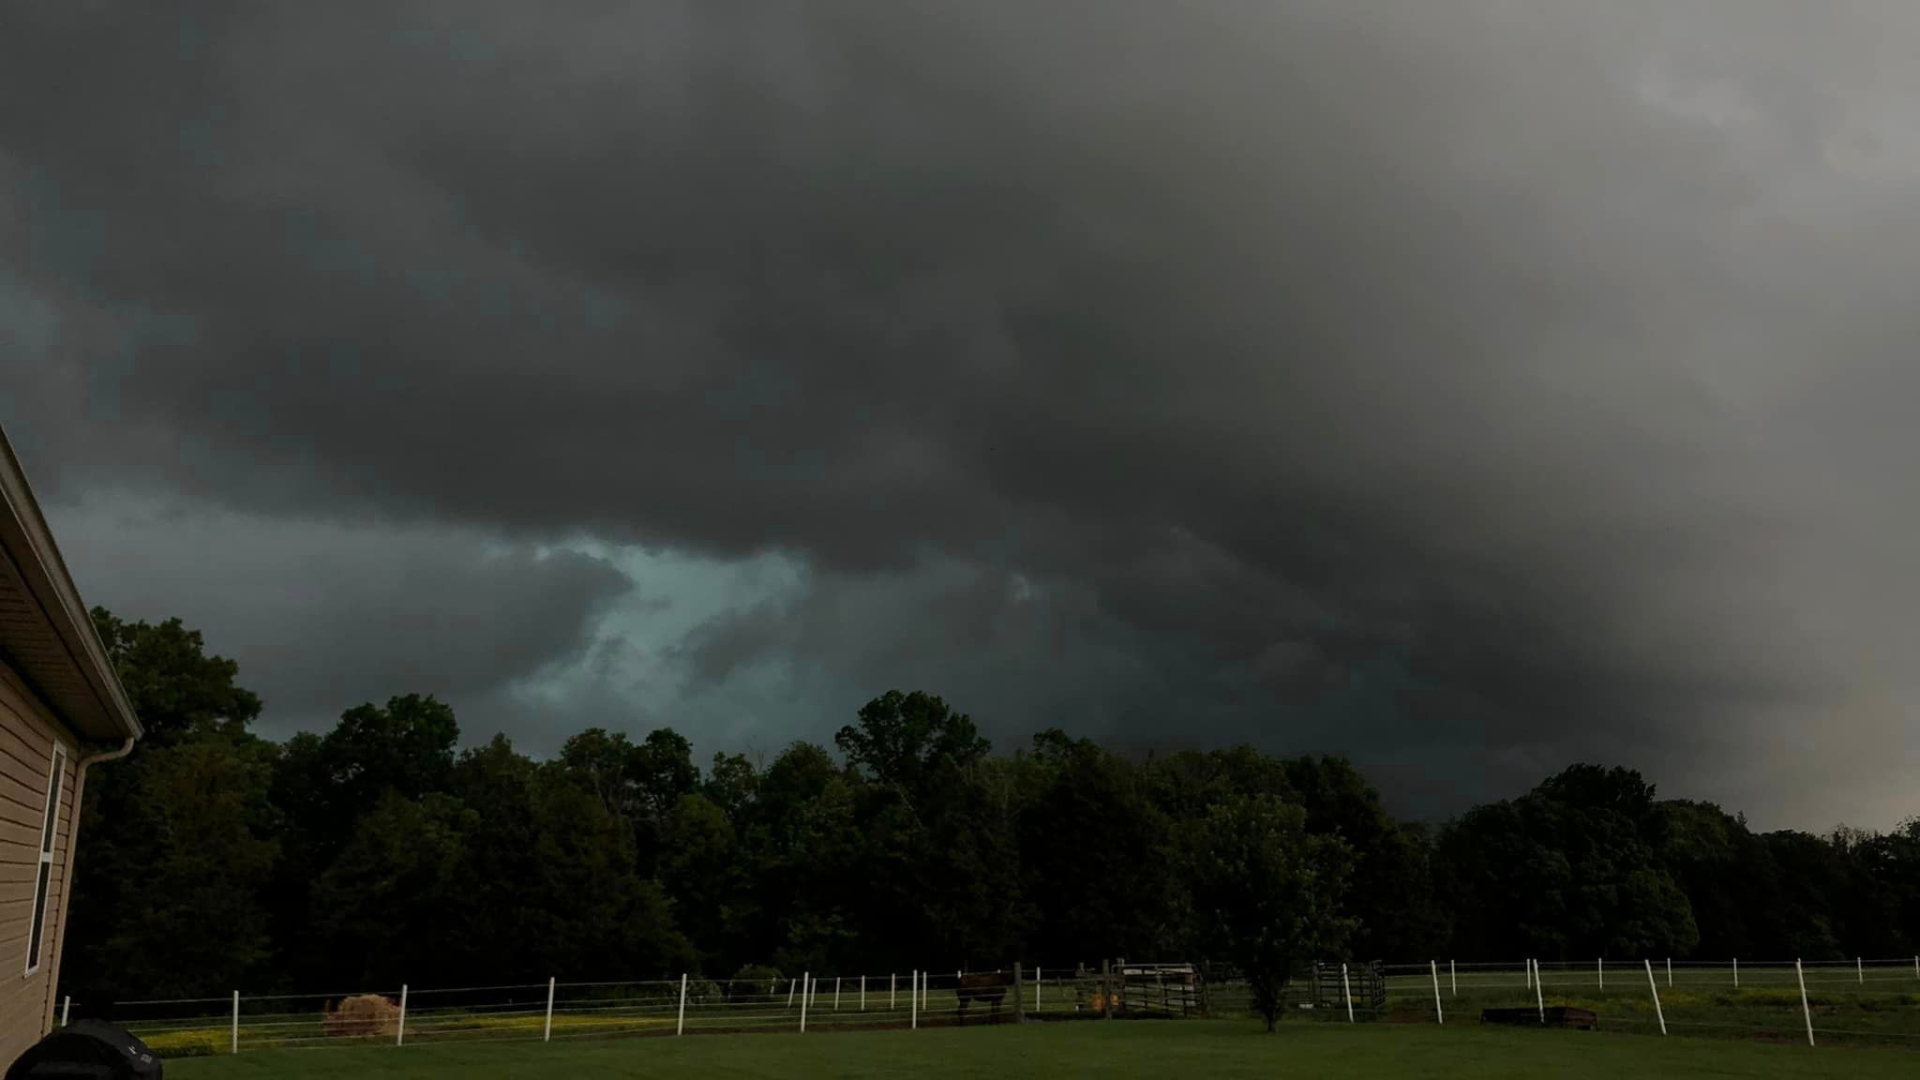 Strong Storm Moves Through Area, Prompting Tornado Warning